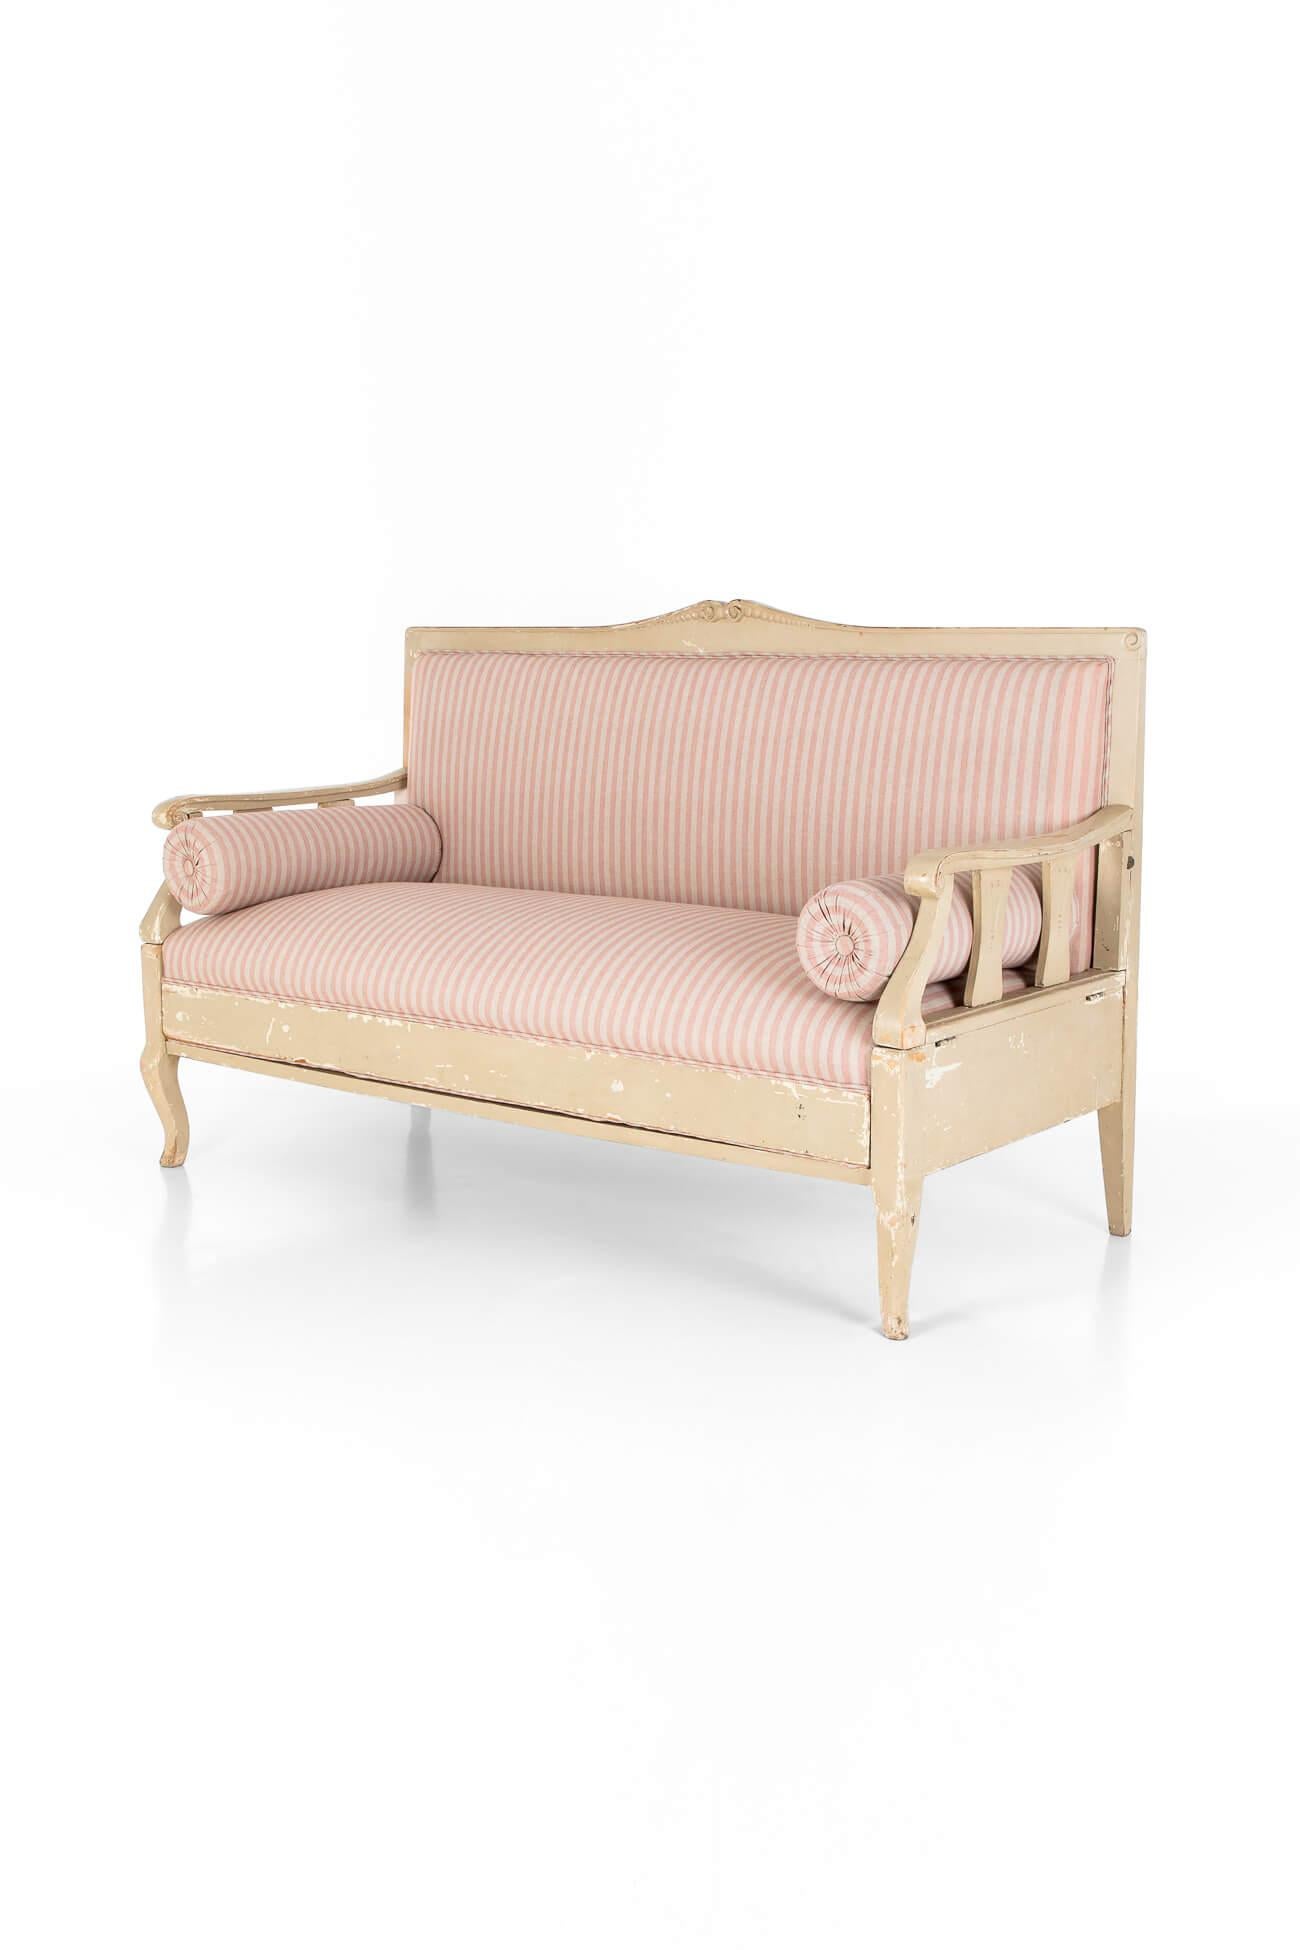 A wonderful Swedish sofa in Gustavian style made of Scots Pine.

The seat ends collapse, allowing the bench to fold down into a flatbed, which extends the length of the sofa and provides a comfortable sleeping option for guests.

It has been